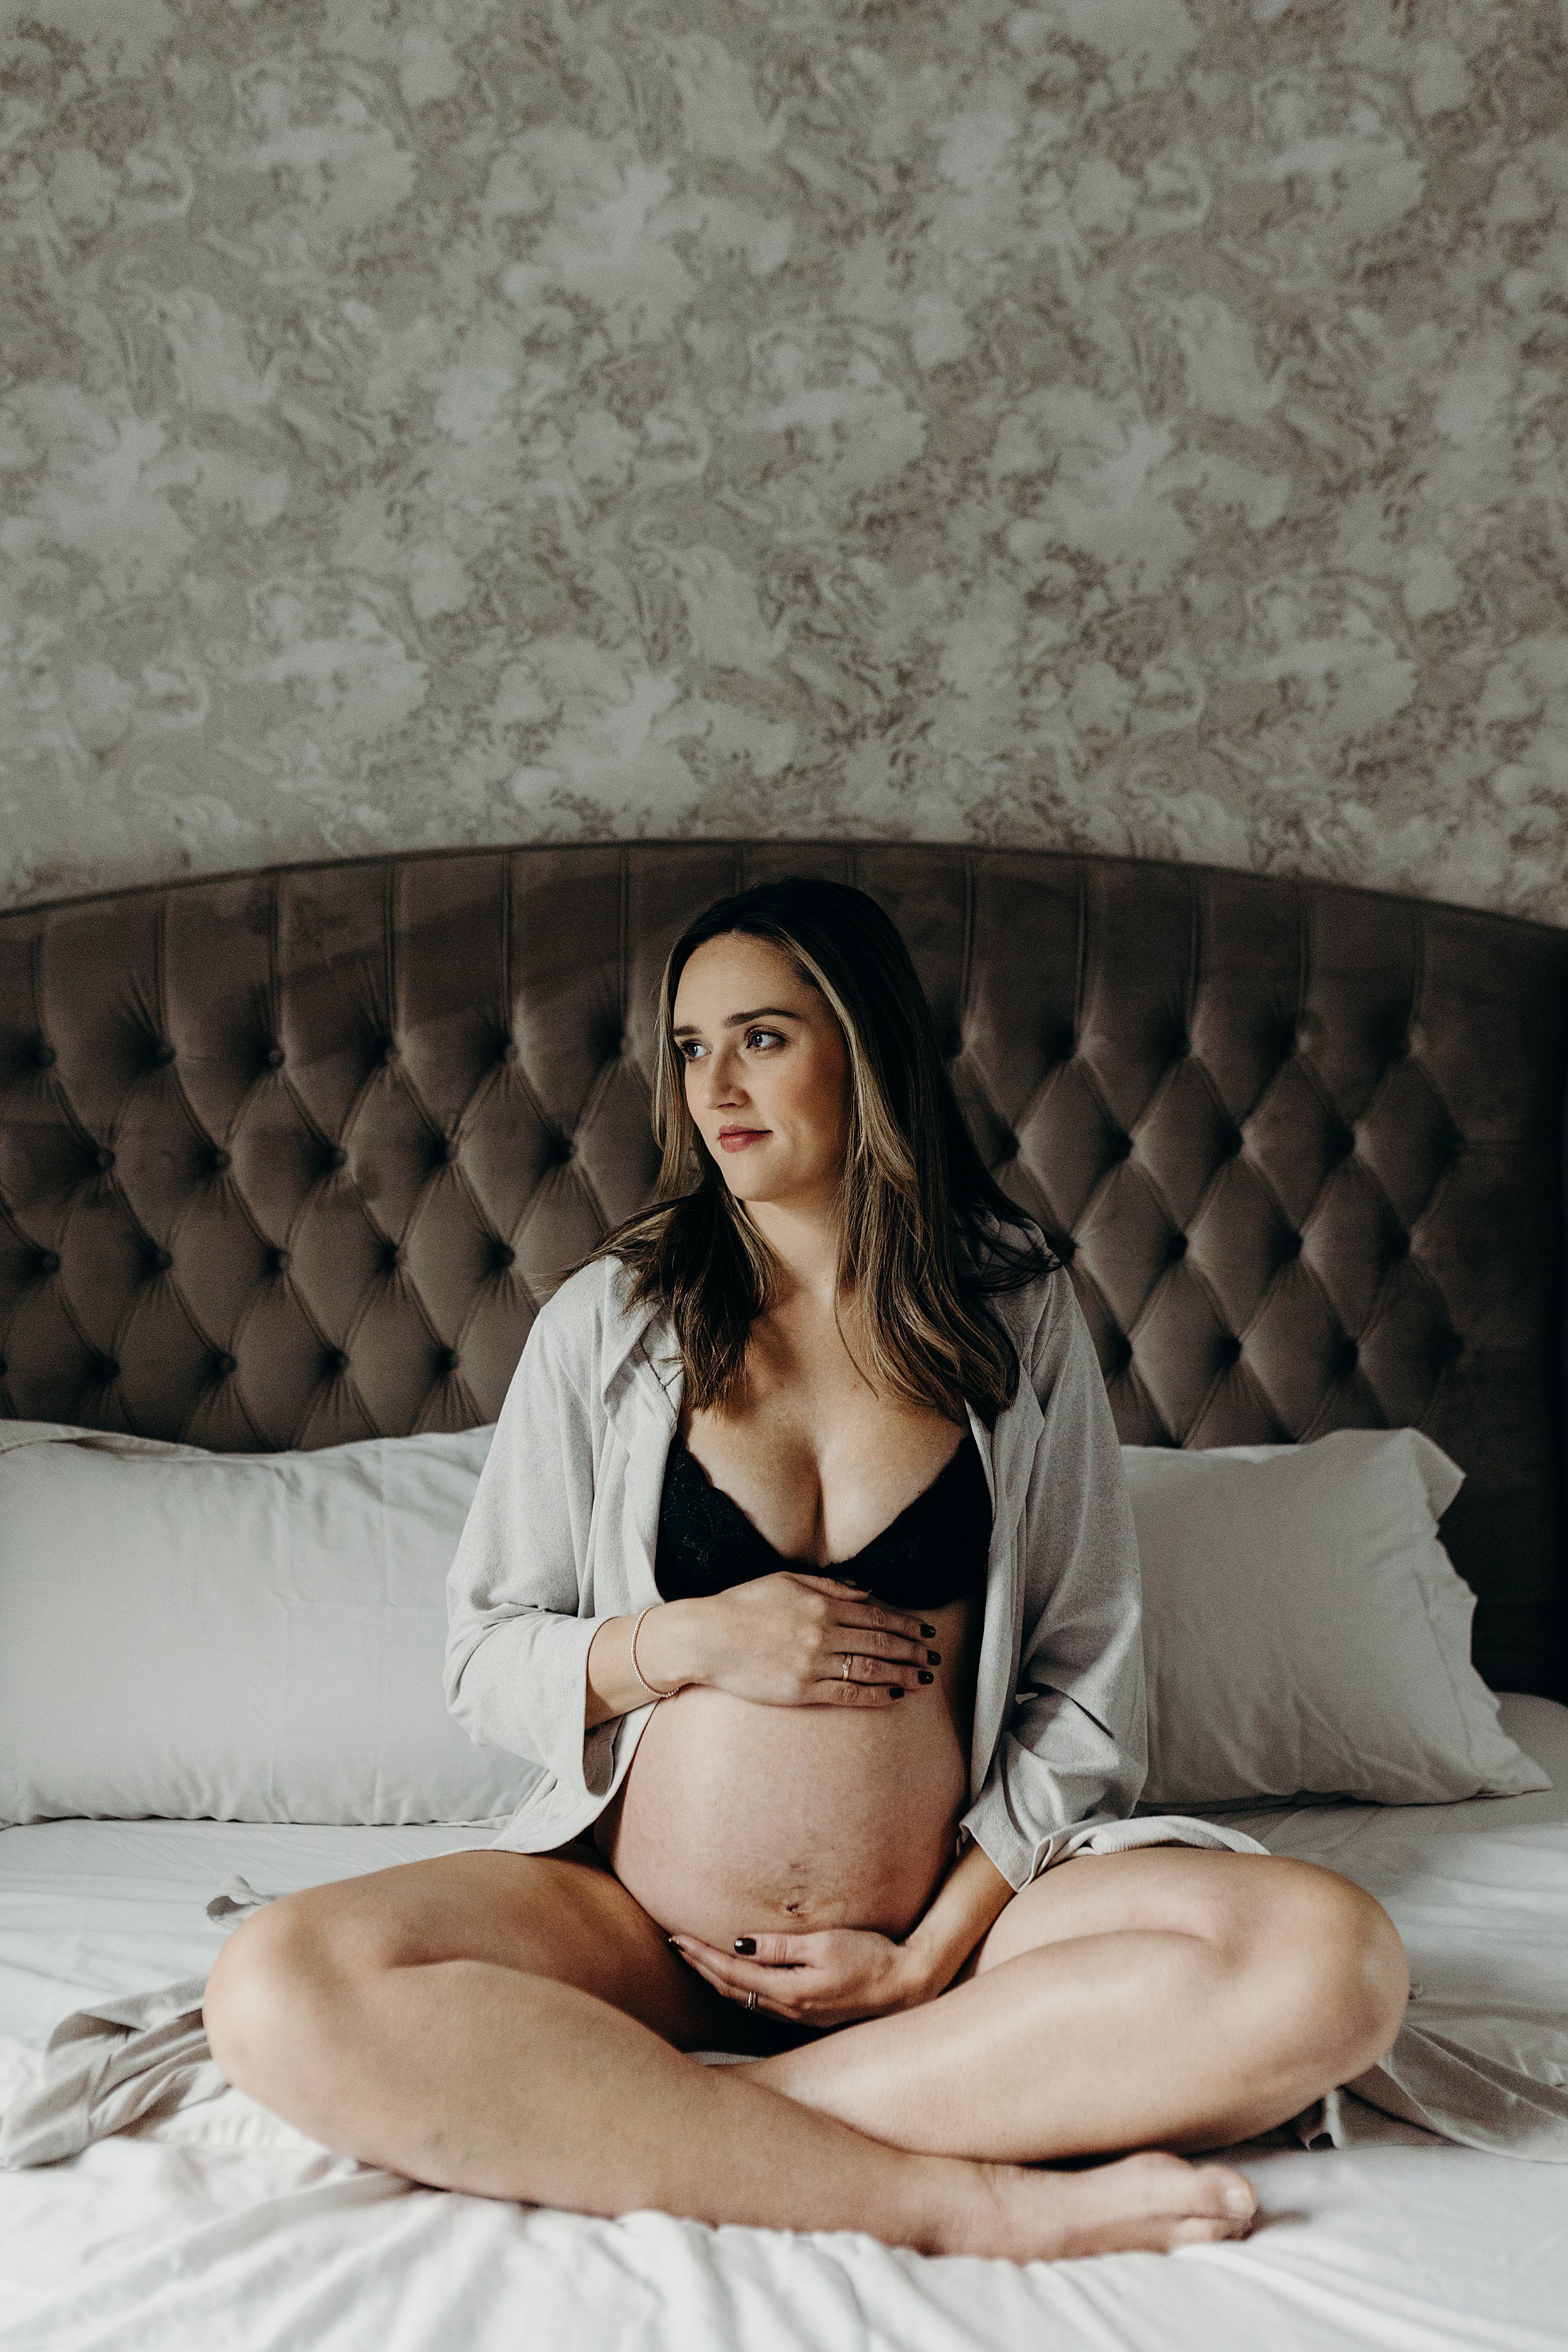 mum to be sitting with her legs crossed on bed during maternity photo session by maternity photographer glasgow